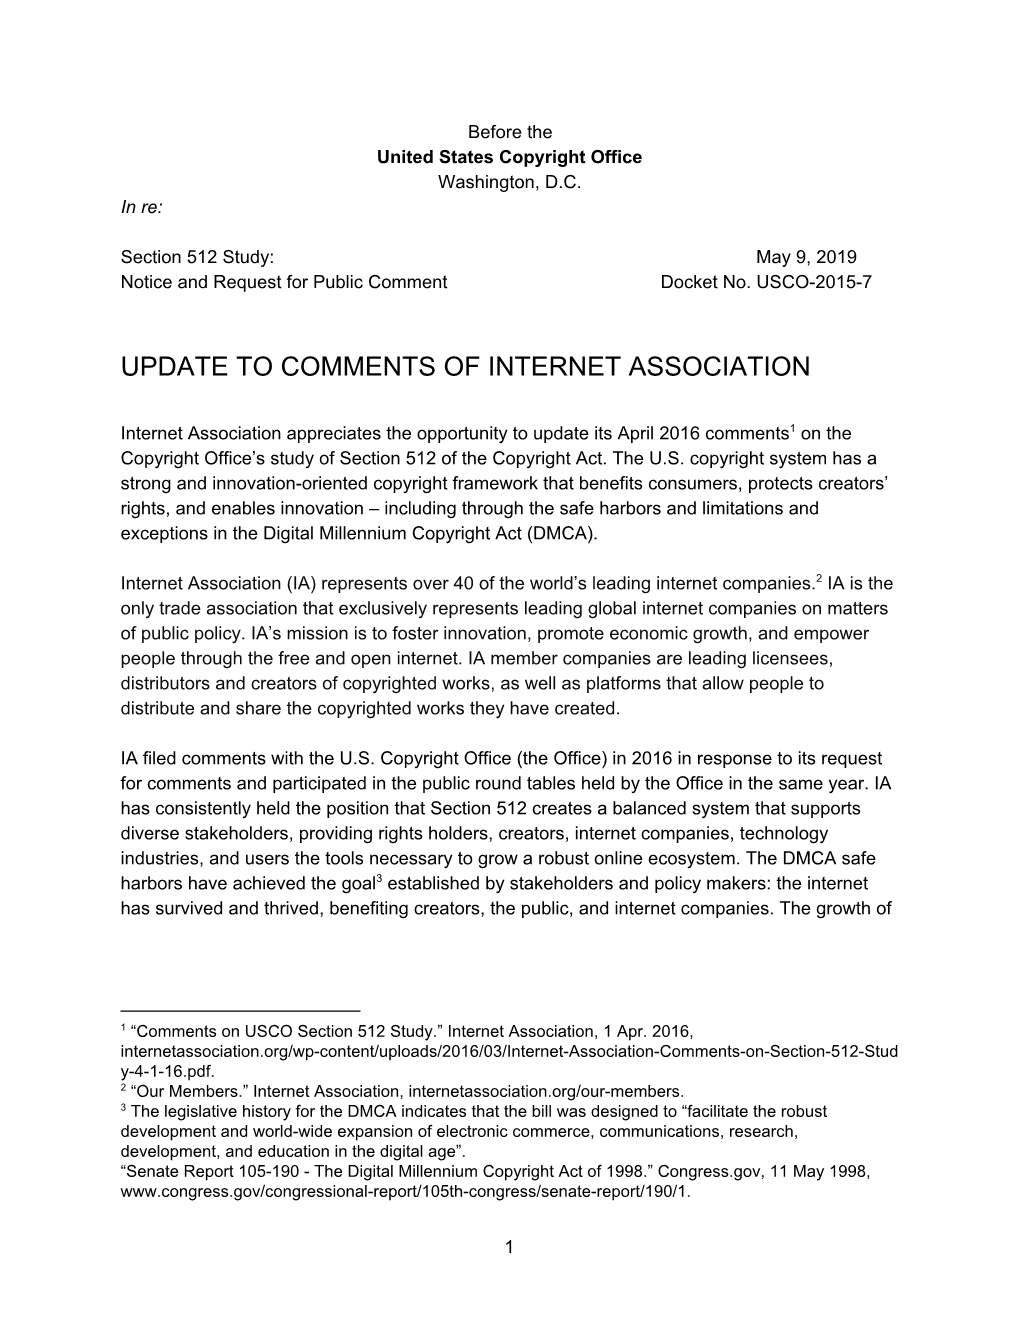 Update to Comments of Internet Association